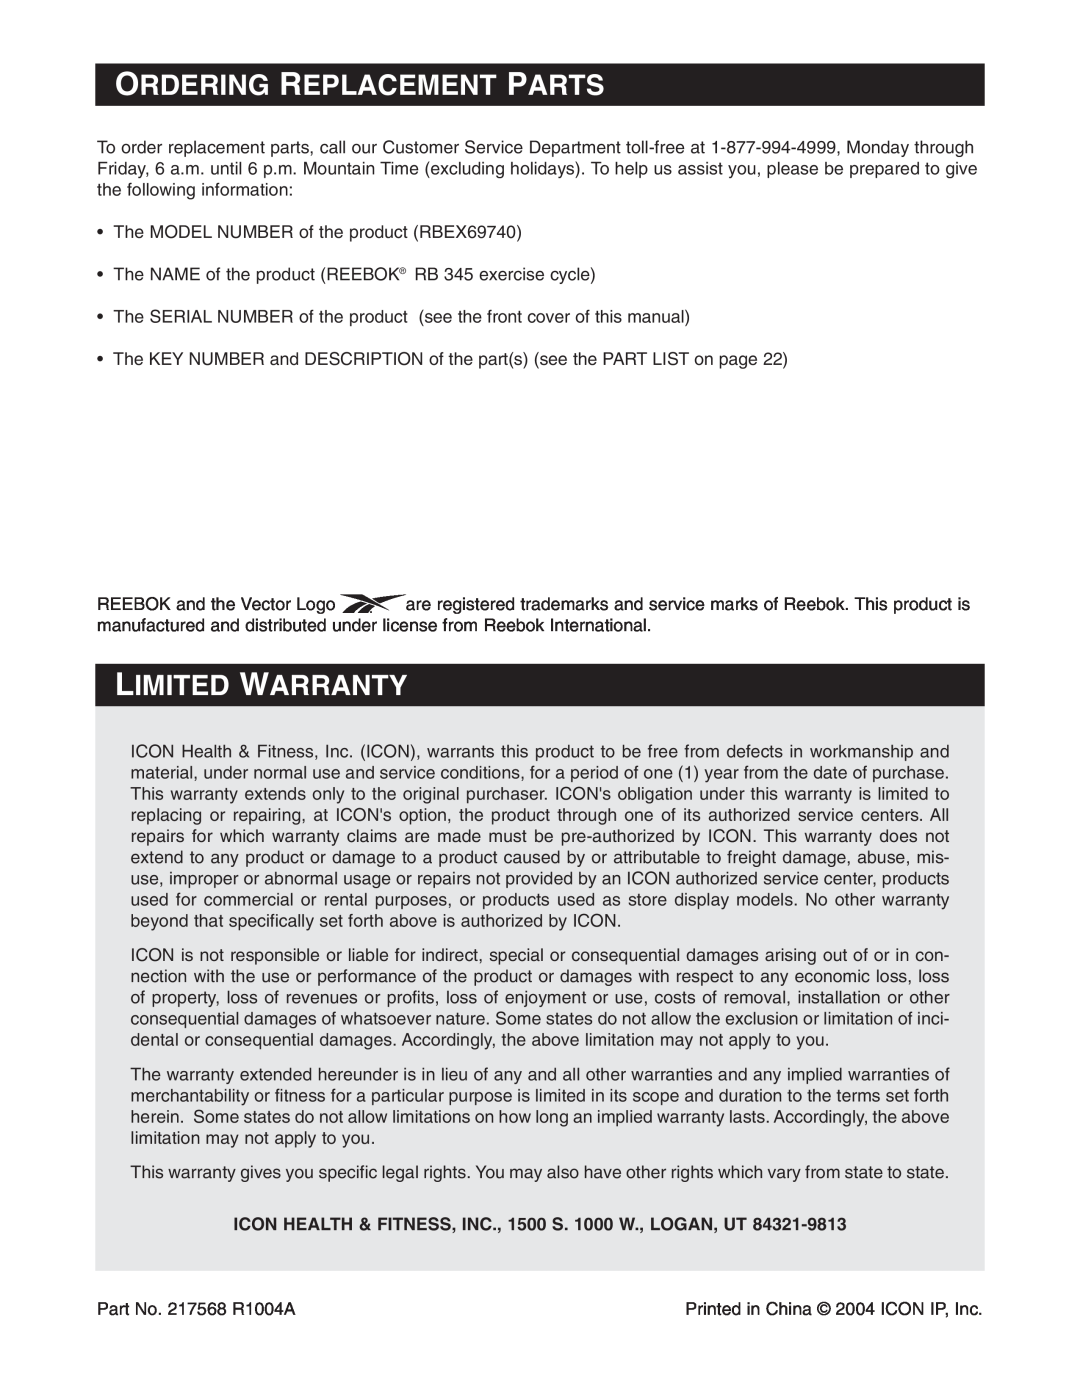 Reebok Fitness RBEX69740 manual Ordering Replacement Parts, Limited Warranty 